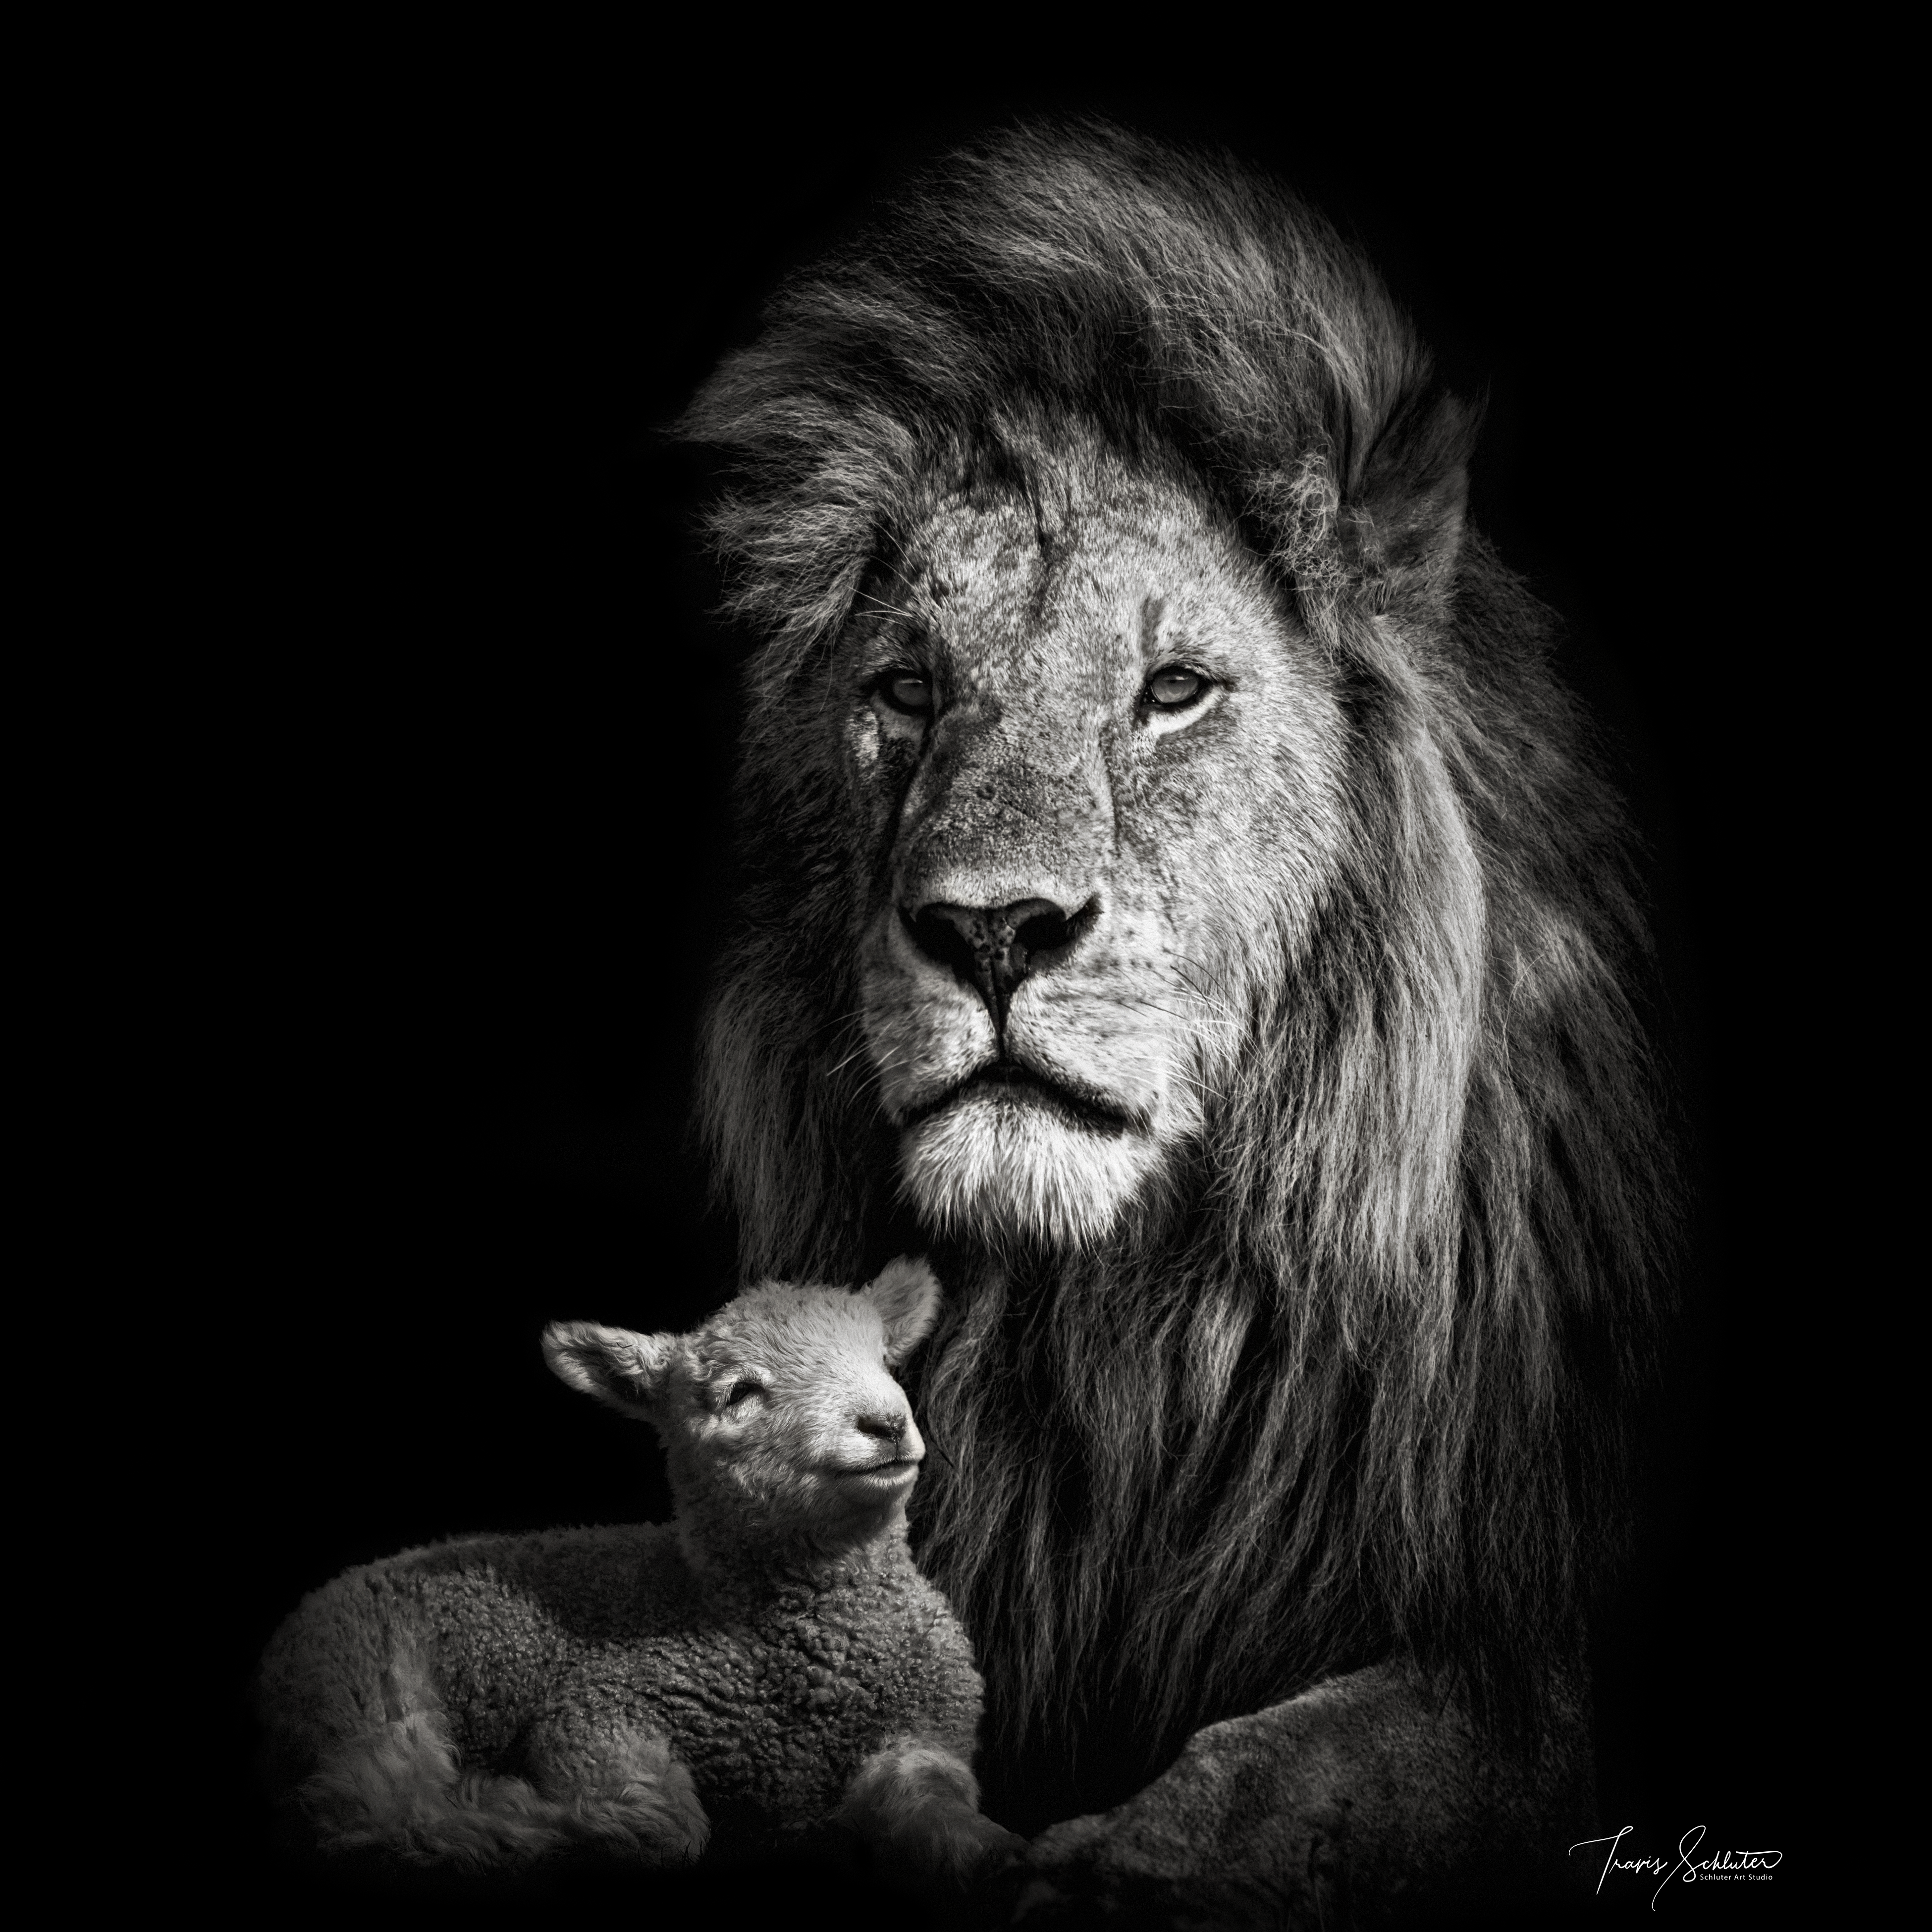 Lion and Lamb Wallpaper Free Lion and Lamb Background